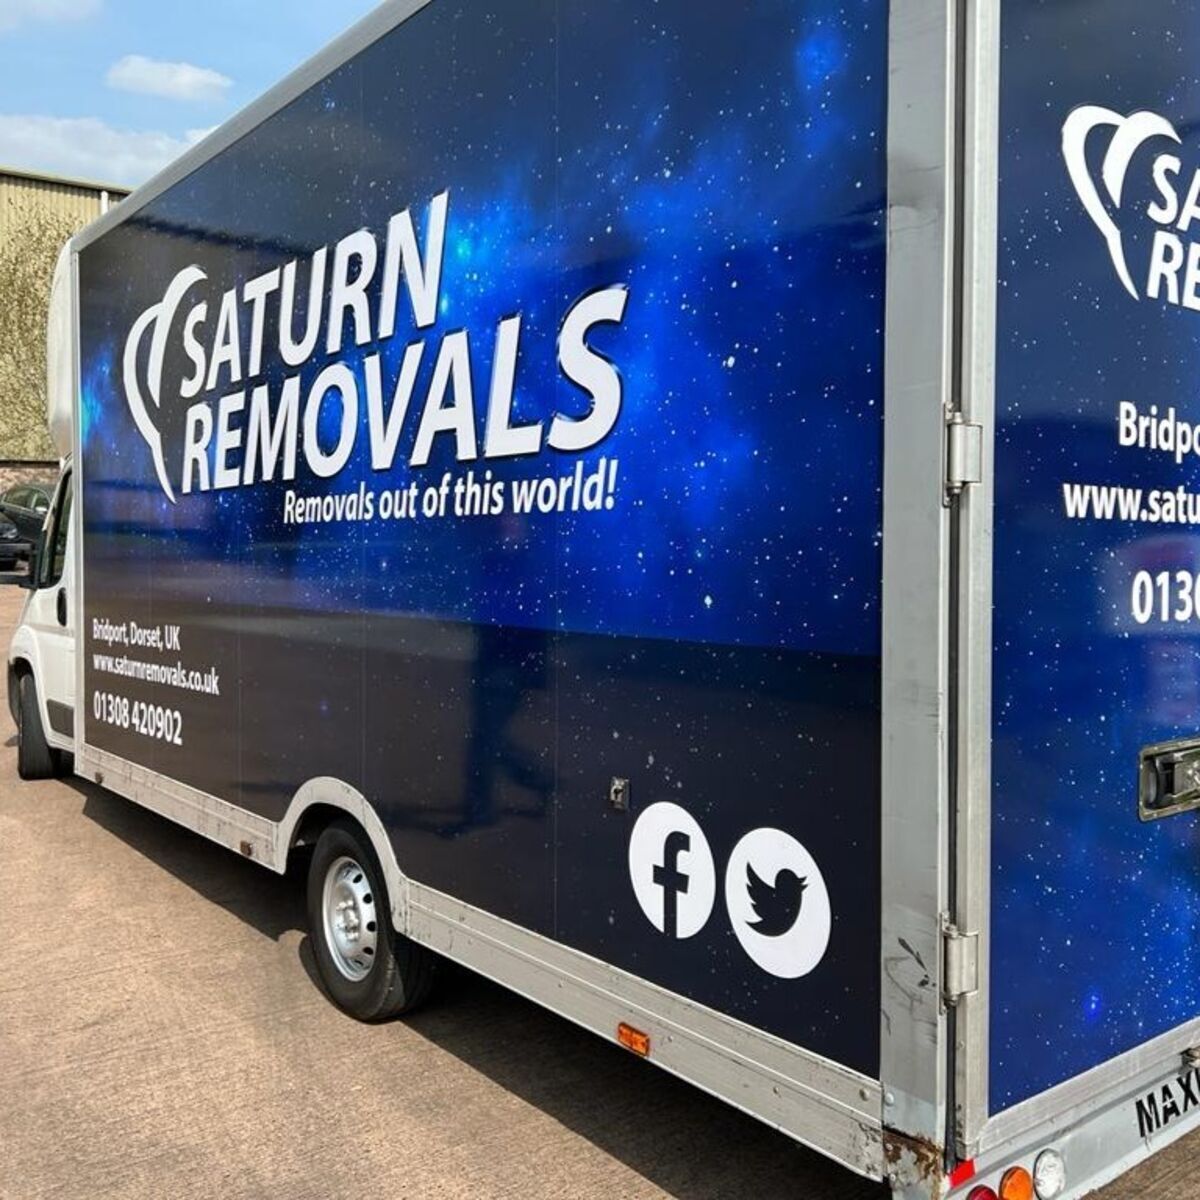 Saturn Removals Fully Printed Wrapped Van